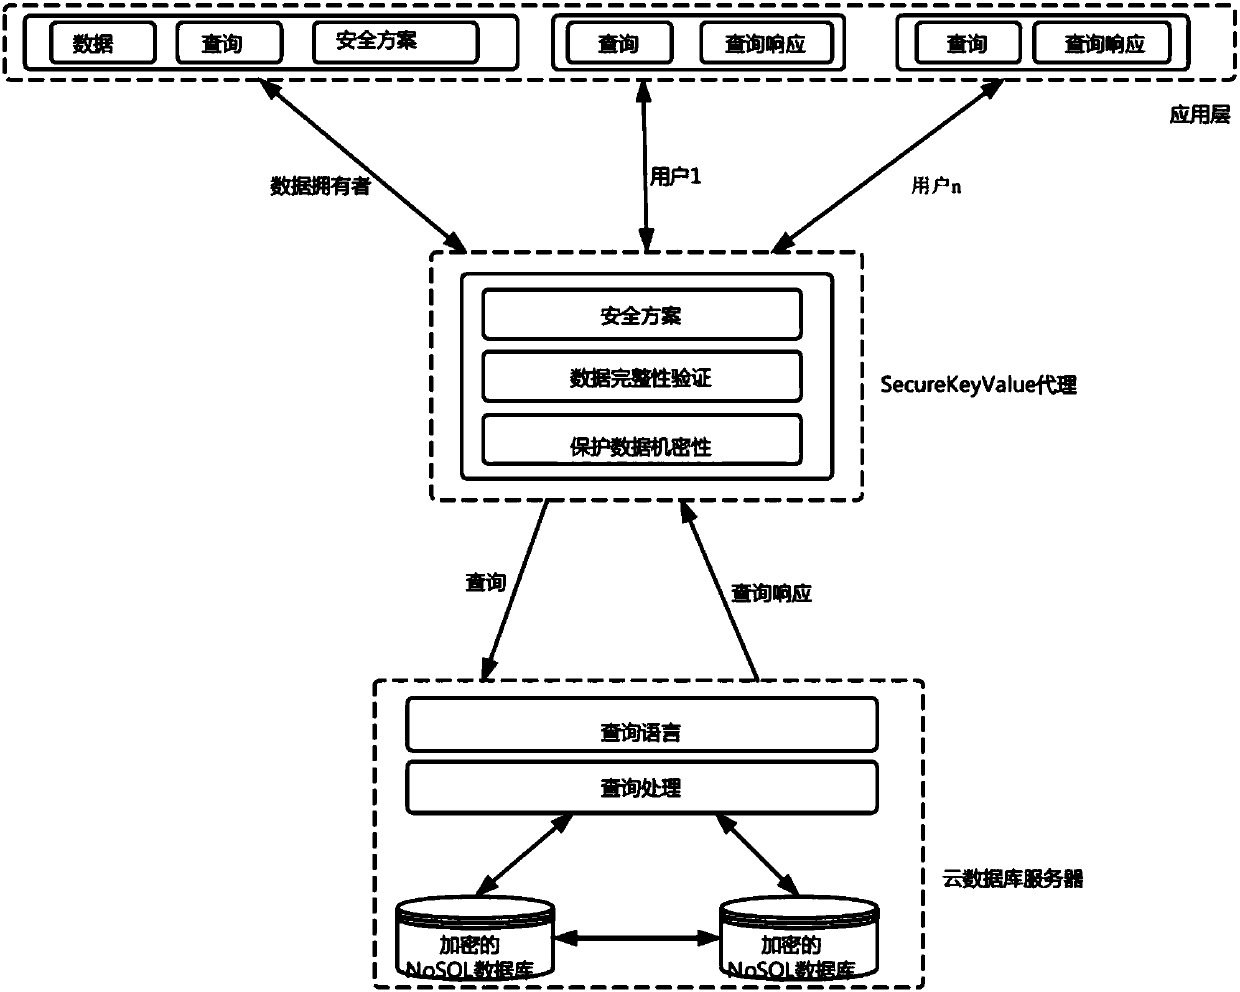 Method for Key-Value database encryption and security query in shared cloud